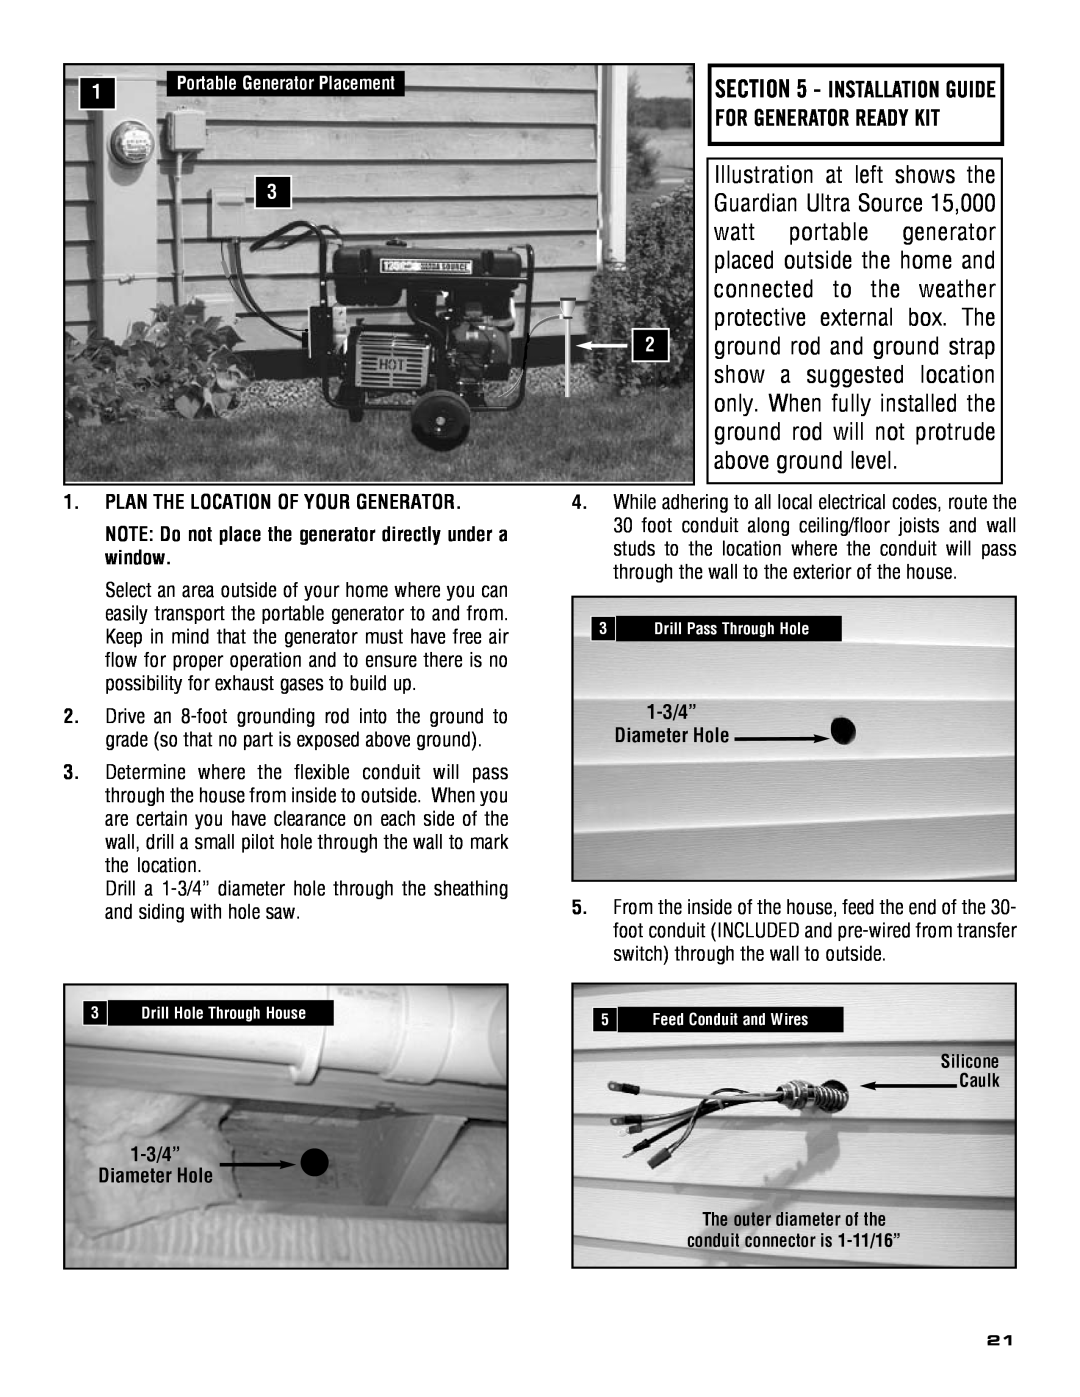 Guardian Technologies 5209 Plan The Location Of Your Generator, NOTE Do not place the generator directly under a window 